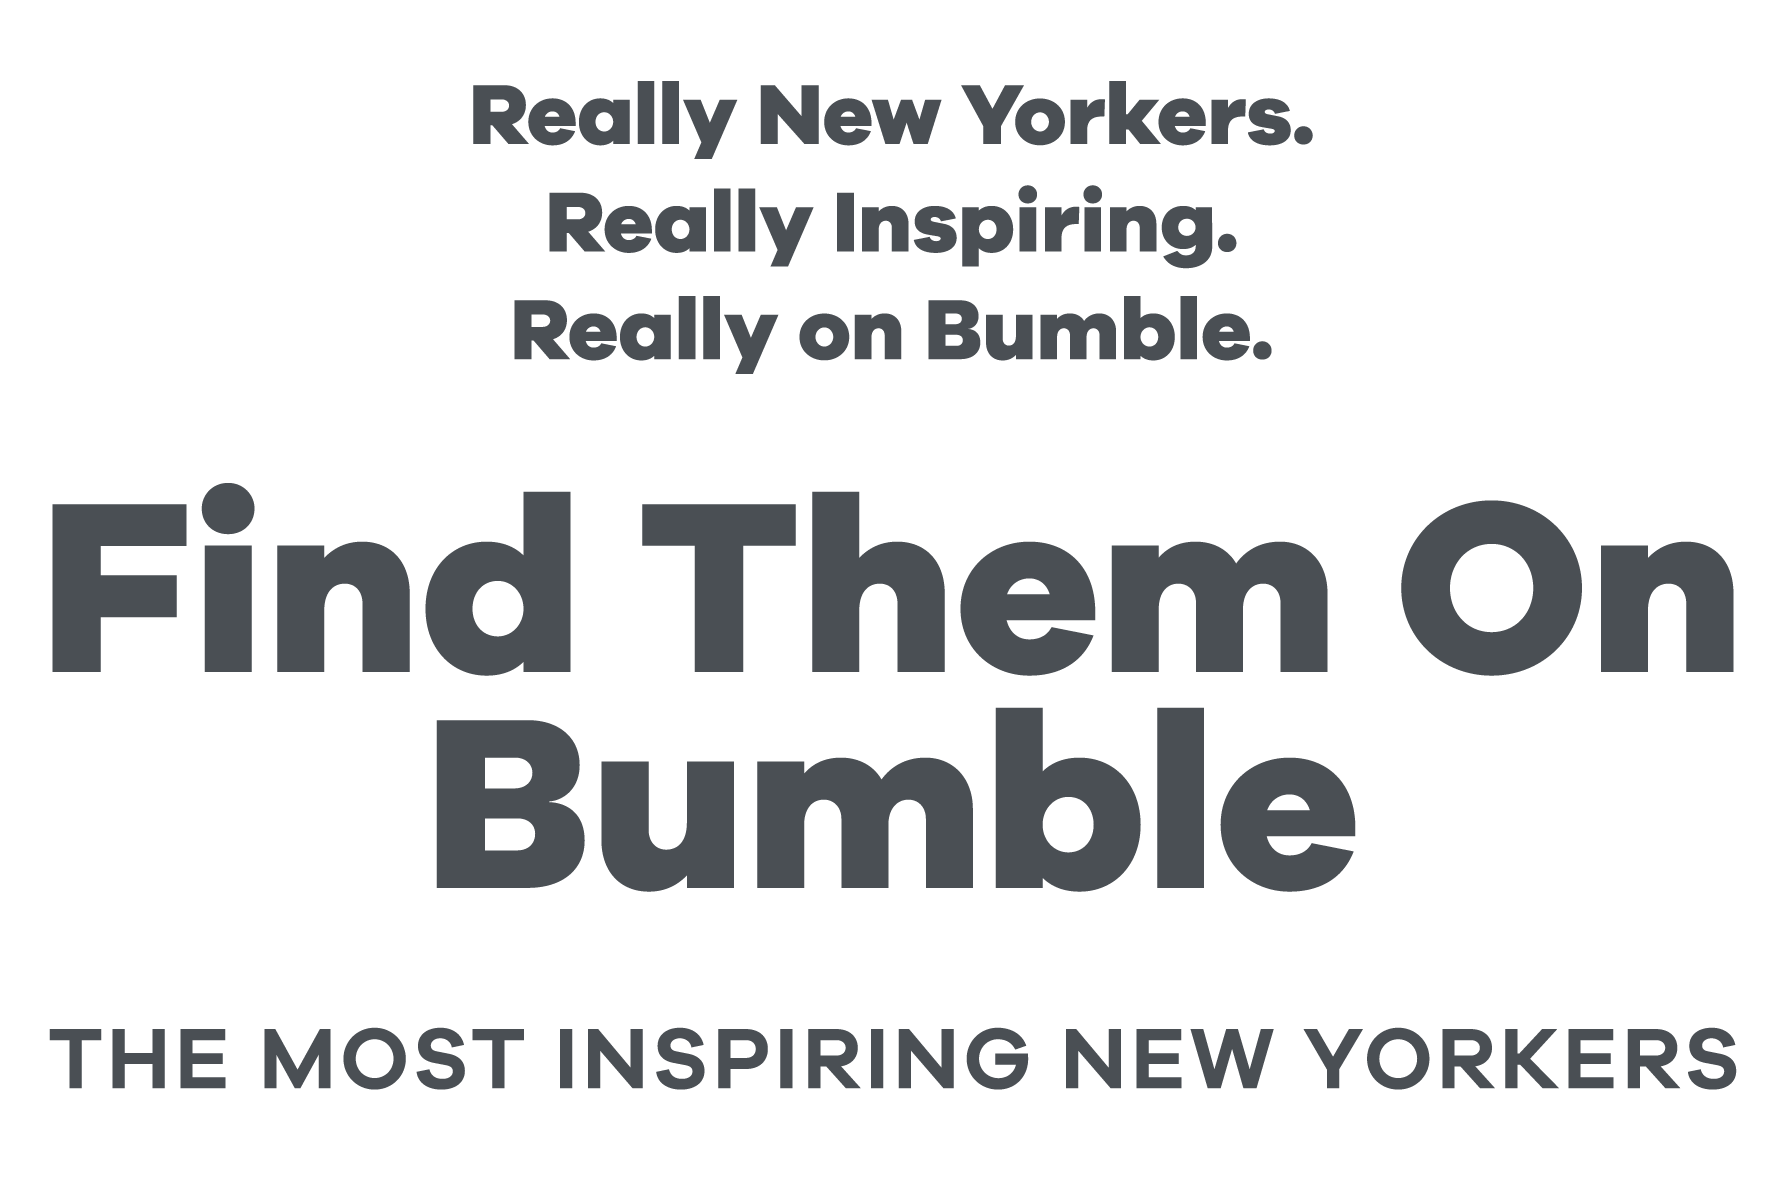 Find the most inspiring New Yorkers on Bumble